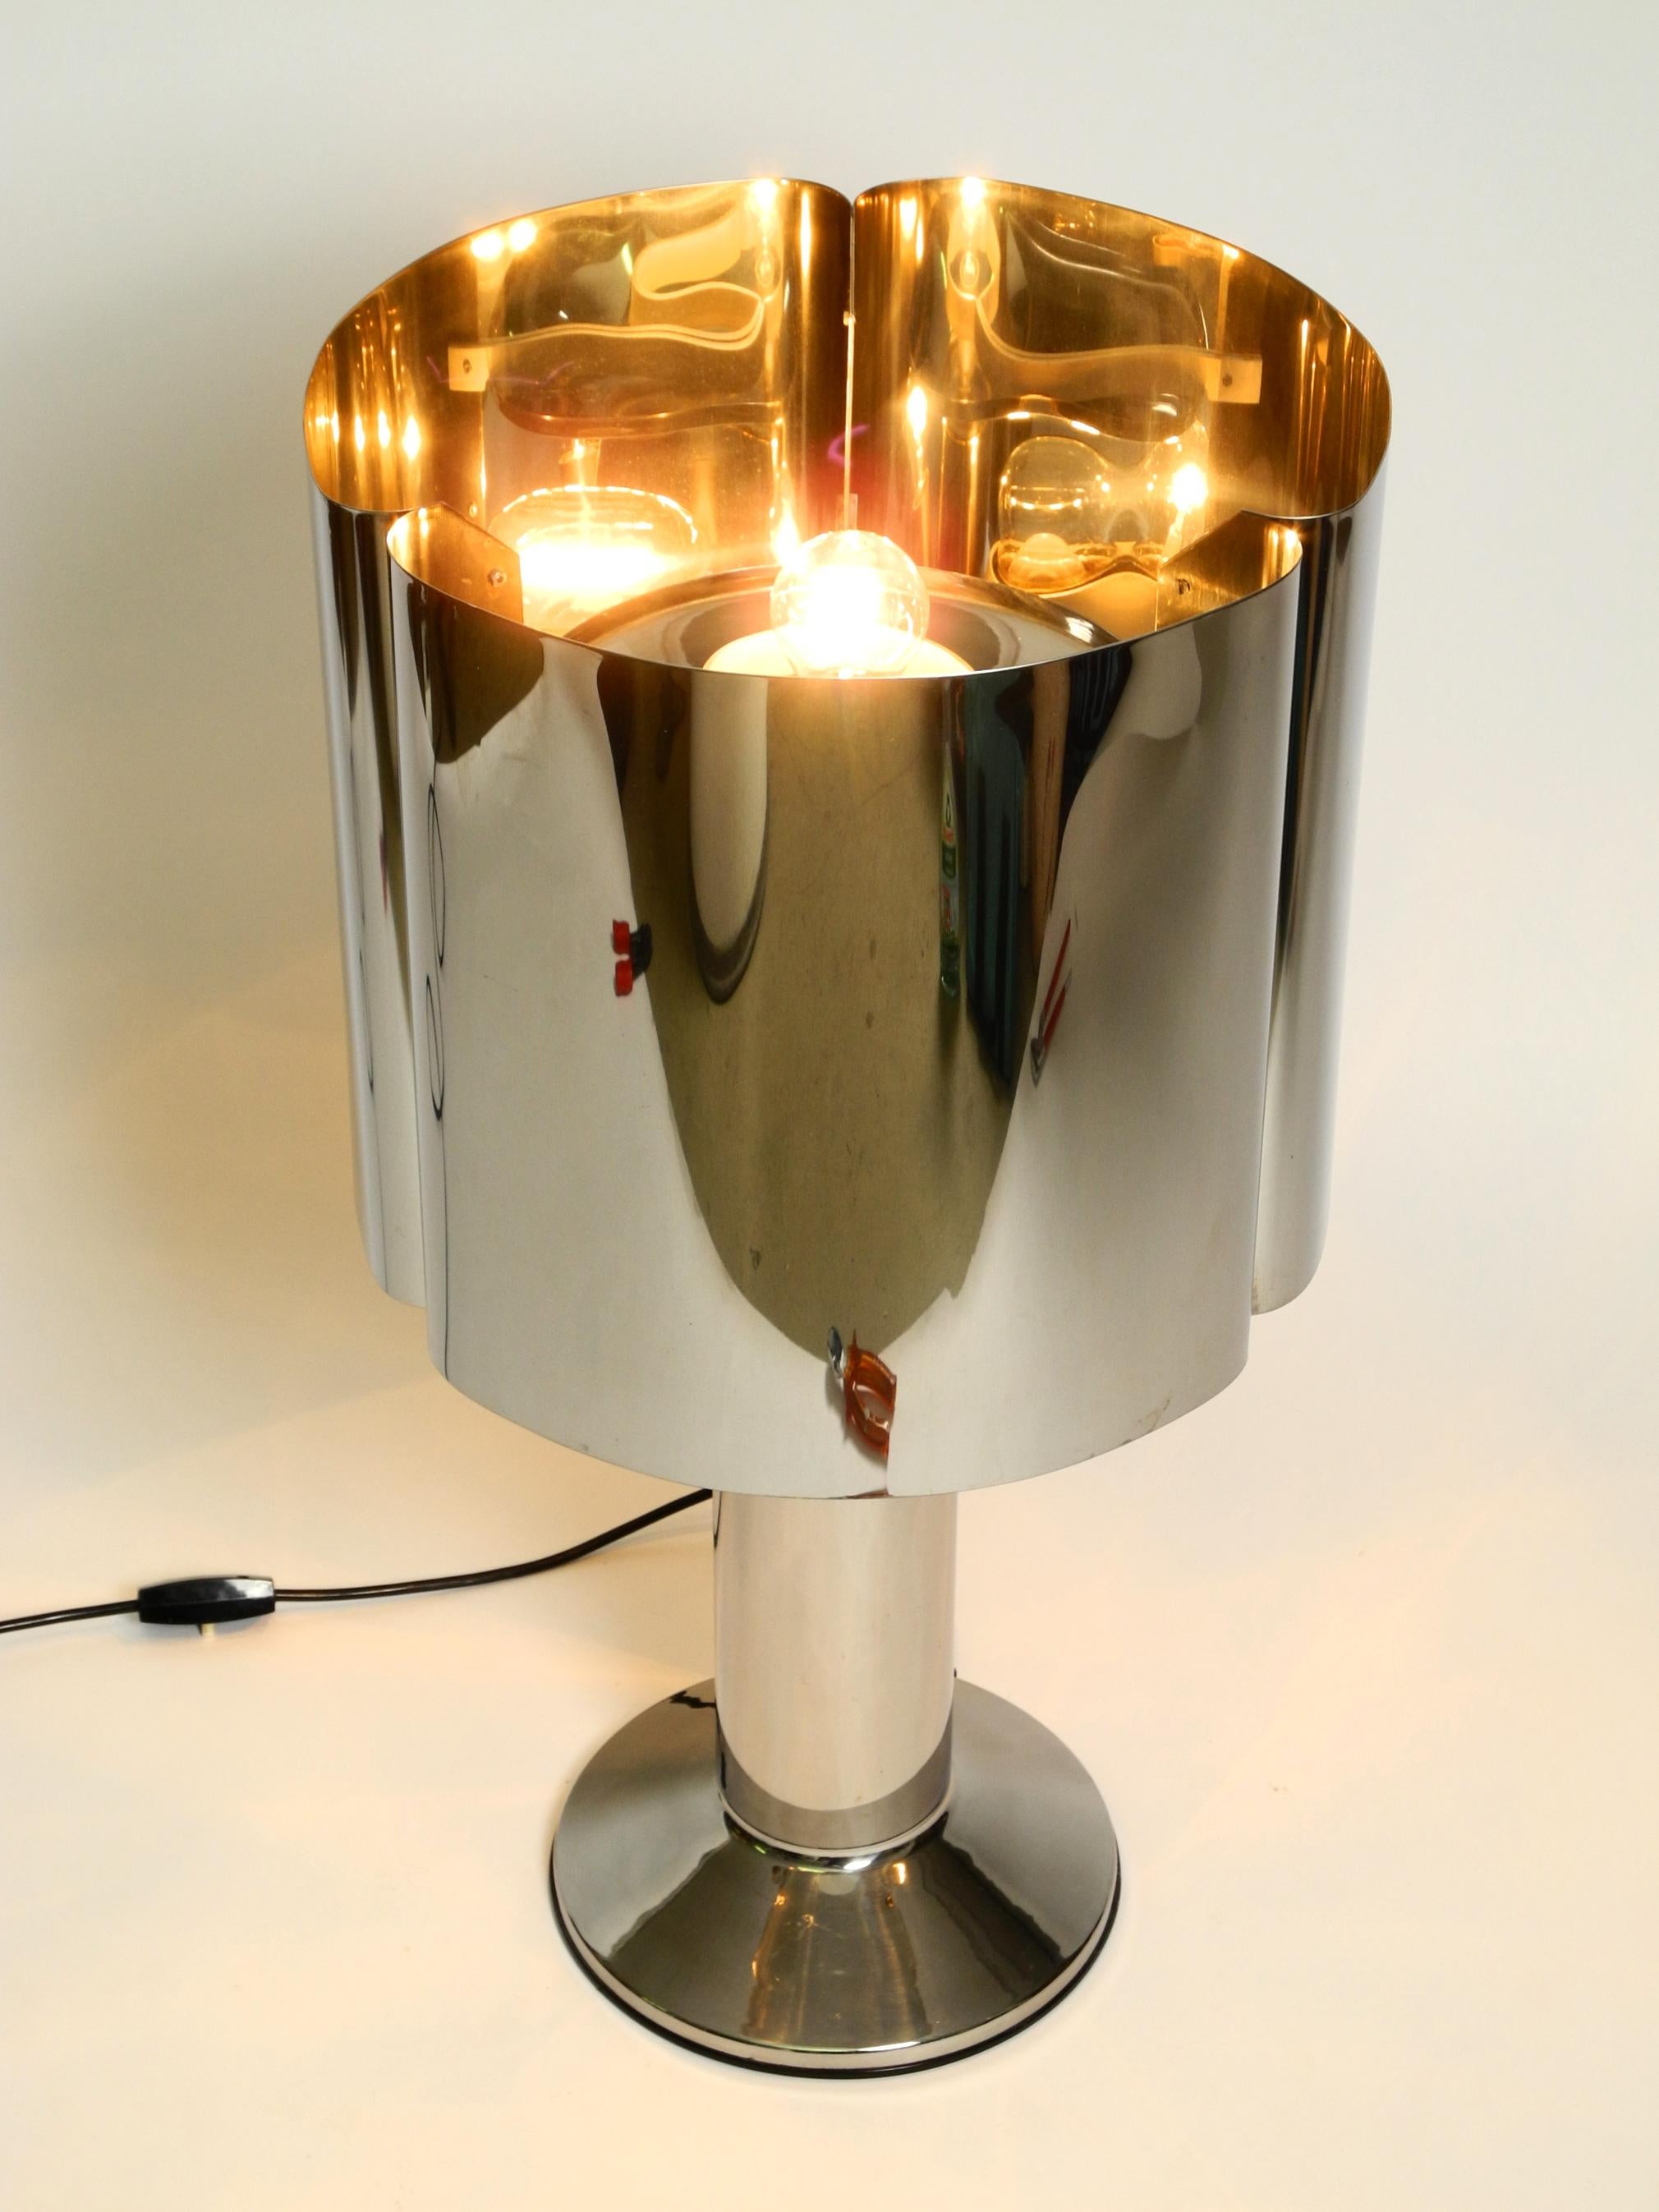 Unique heavy, huge XXL 1970s Space Age metal chrome table lamp with metal shade. 
Very rare high quality German design.
Under the lamp is a label with 